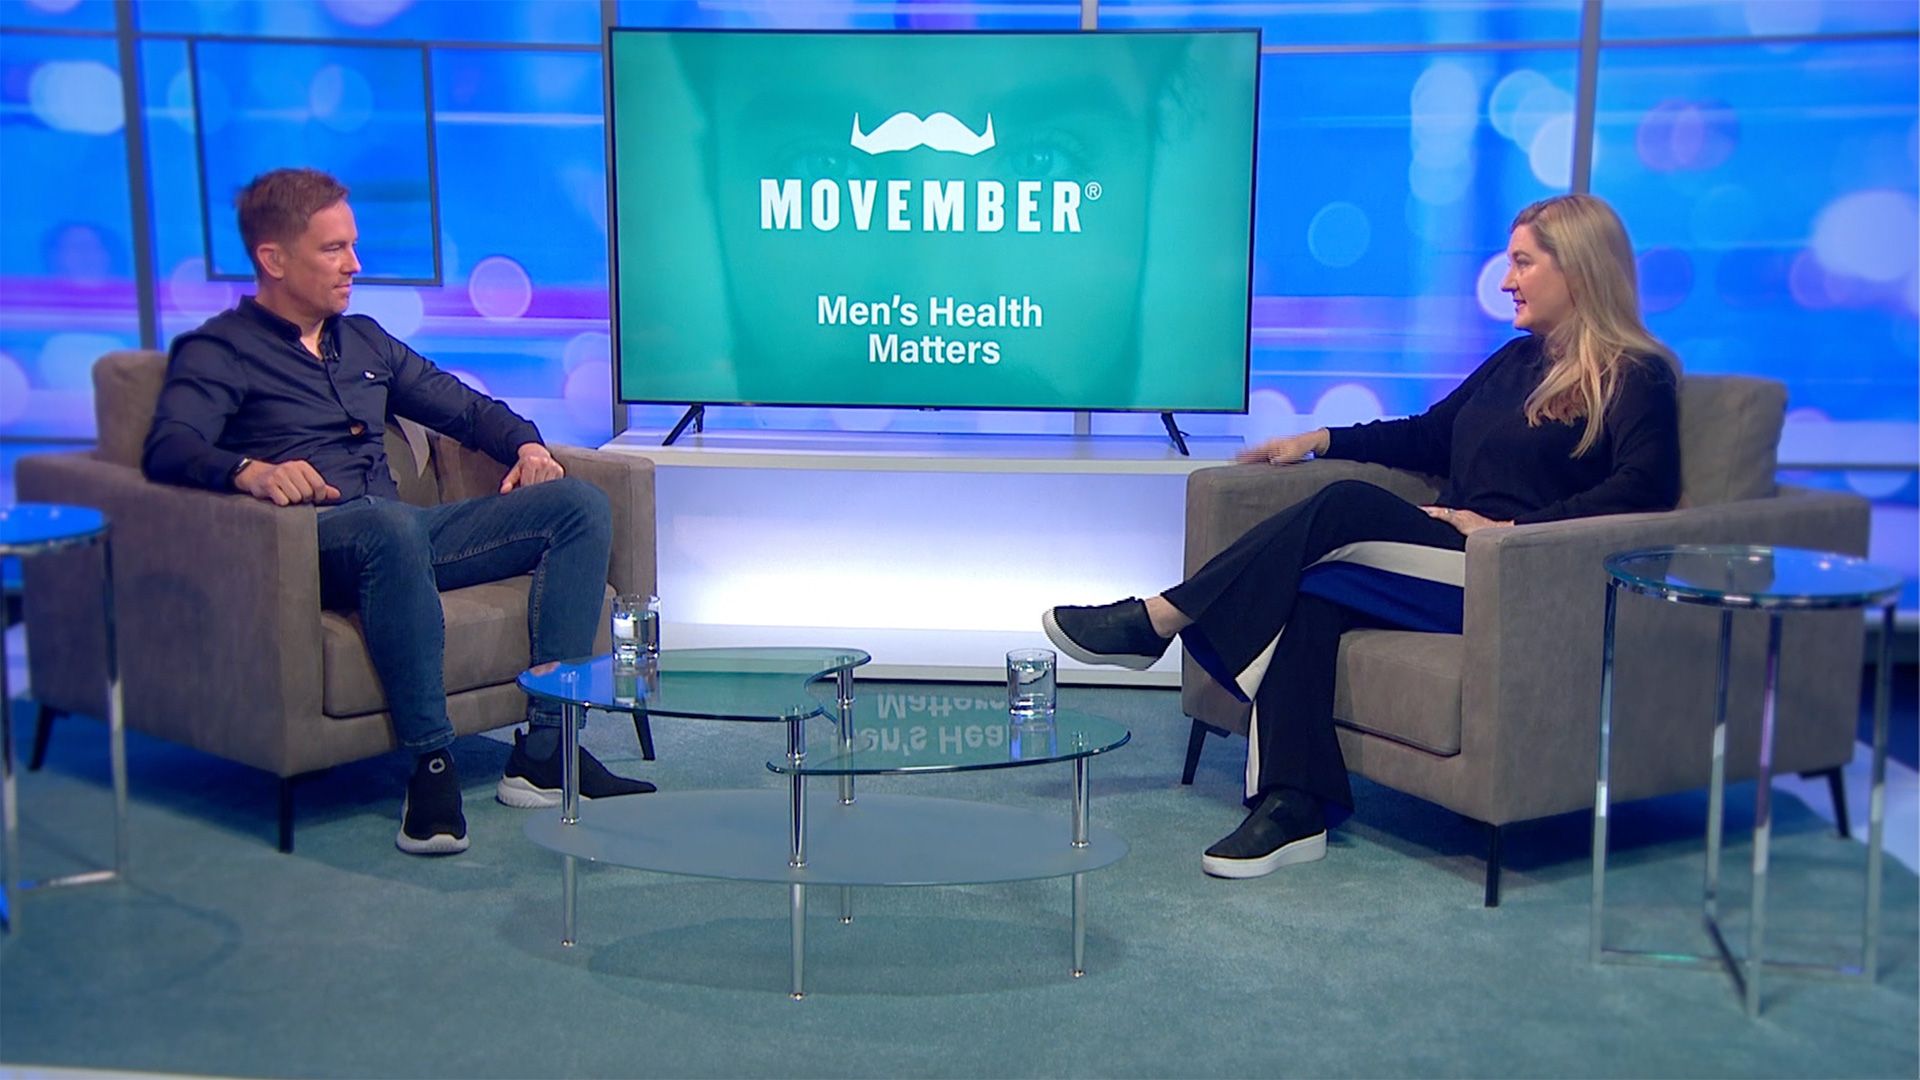 Two TV panellists sitting in couches, discussing men's health.